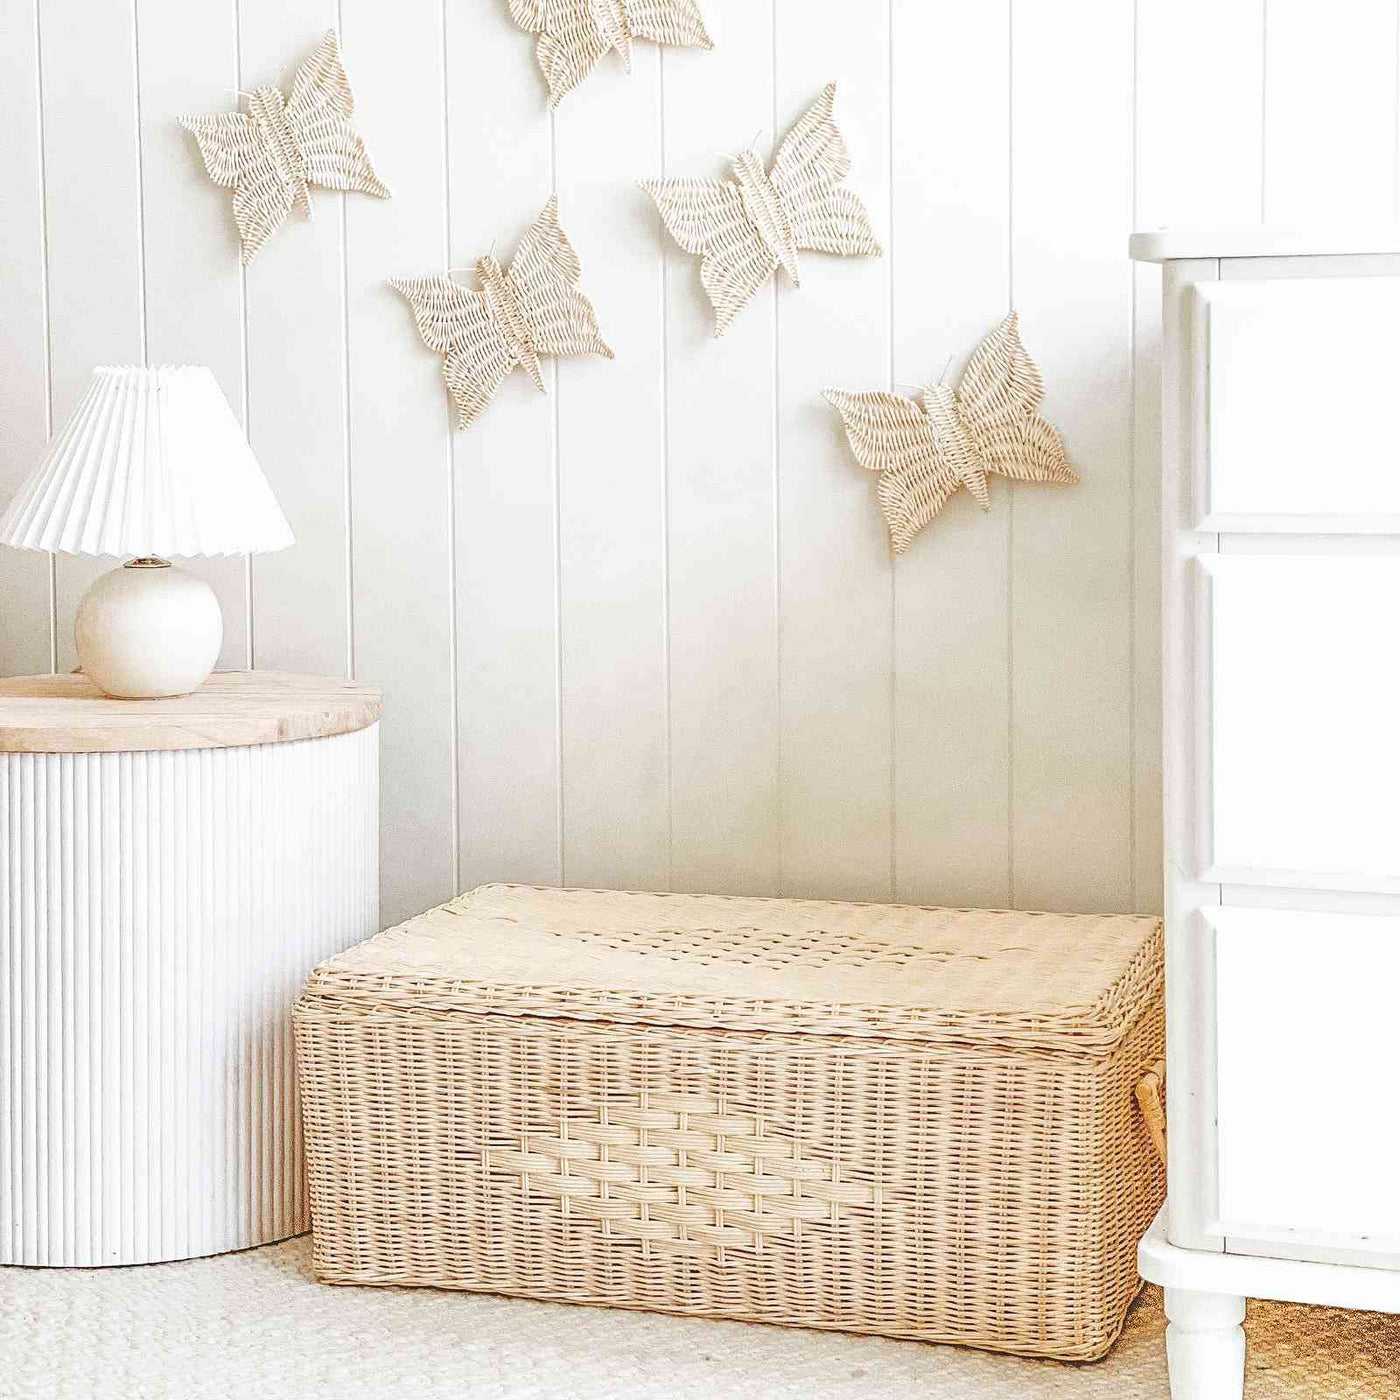 Rattan Butterfly Wall Decals